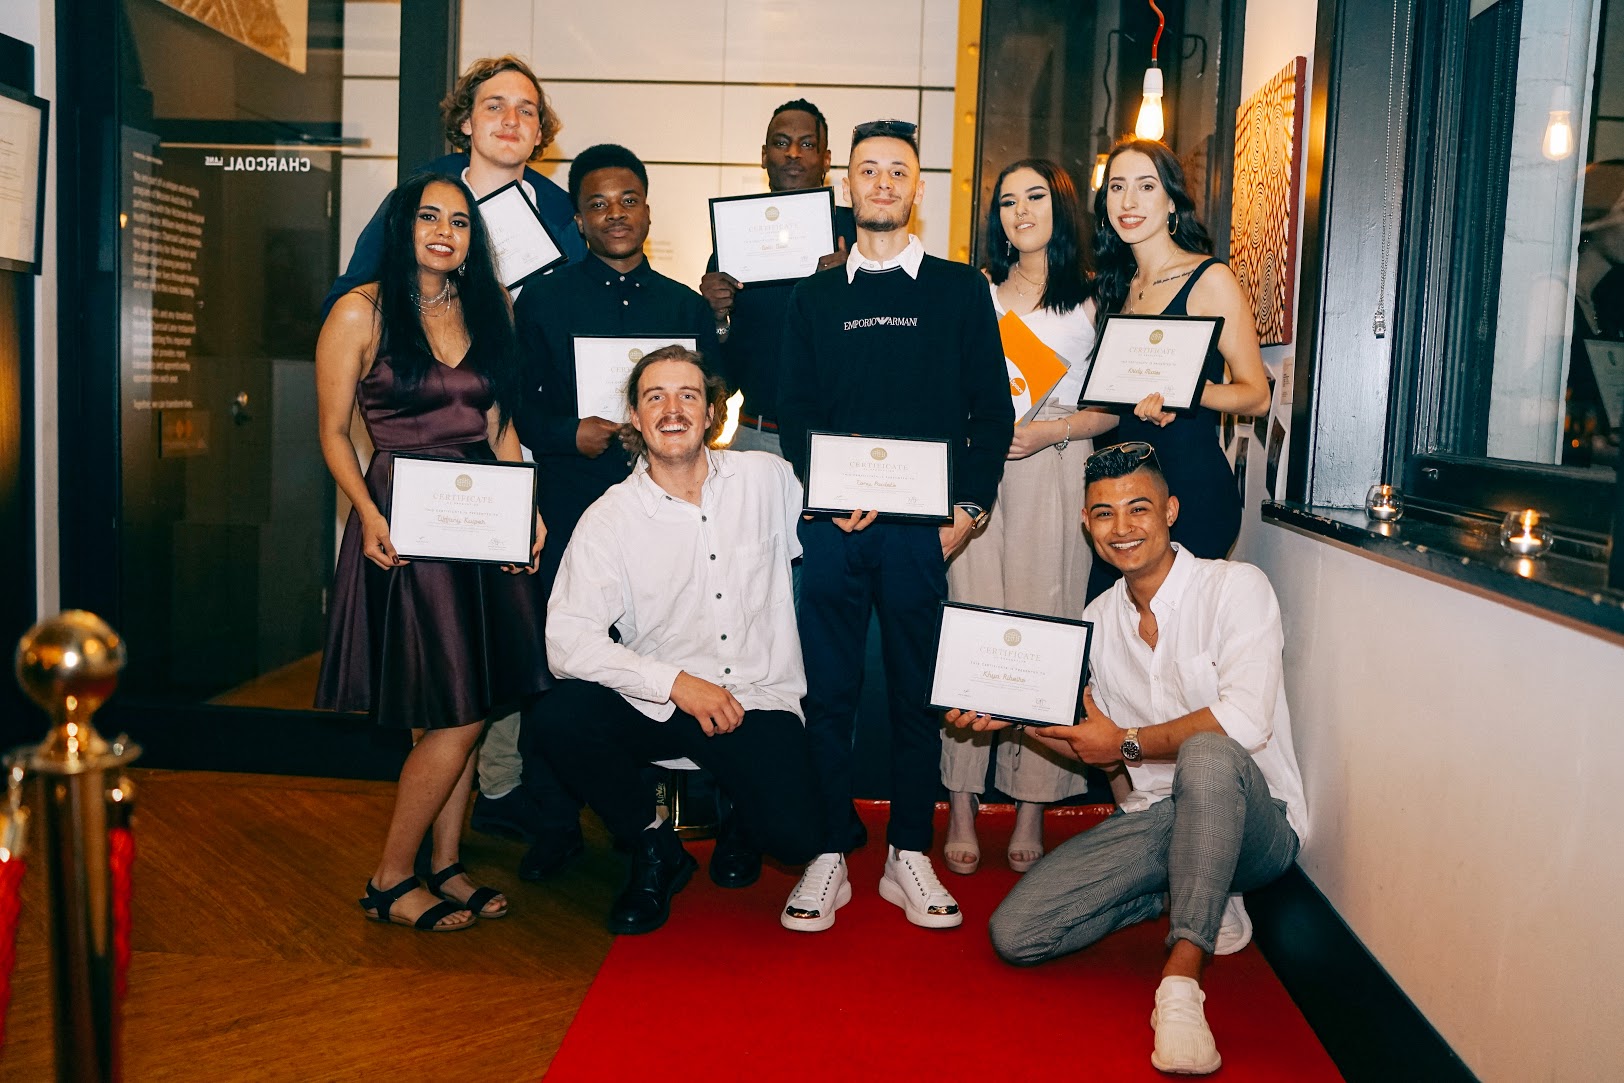 Seven young people graduate HoMie’s Pathway Alliance program for 2019!